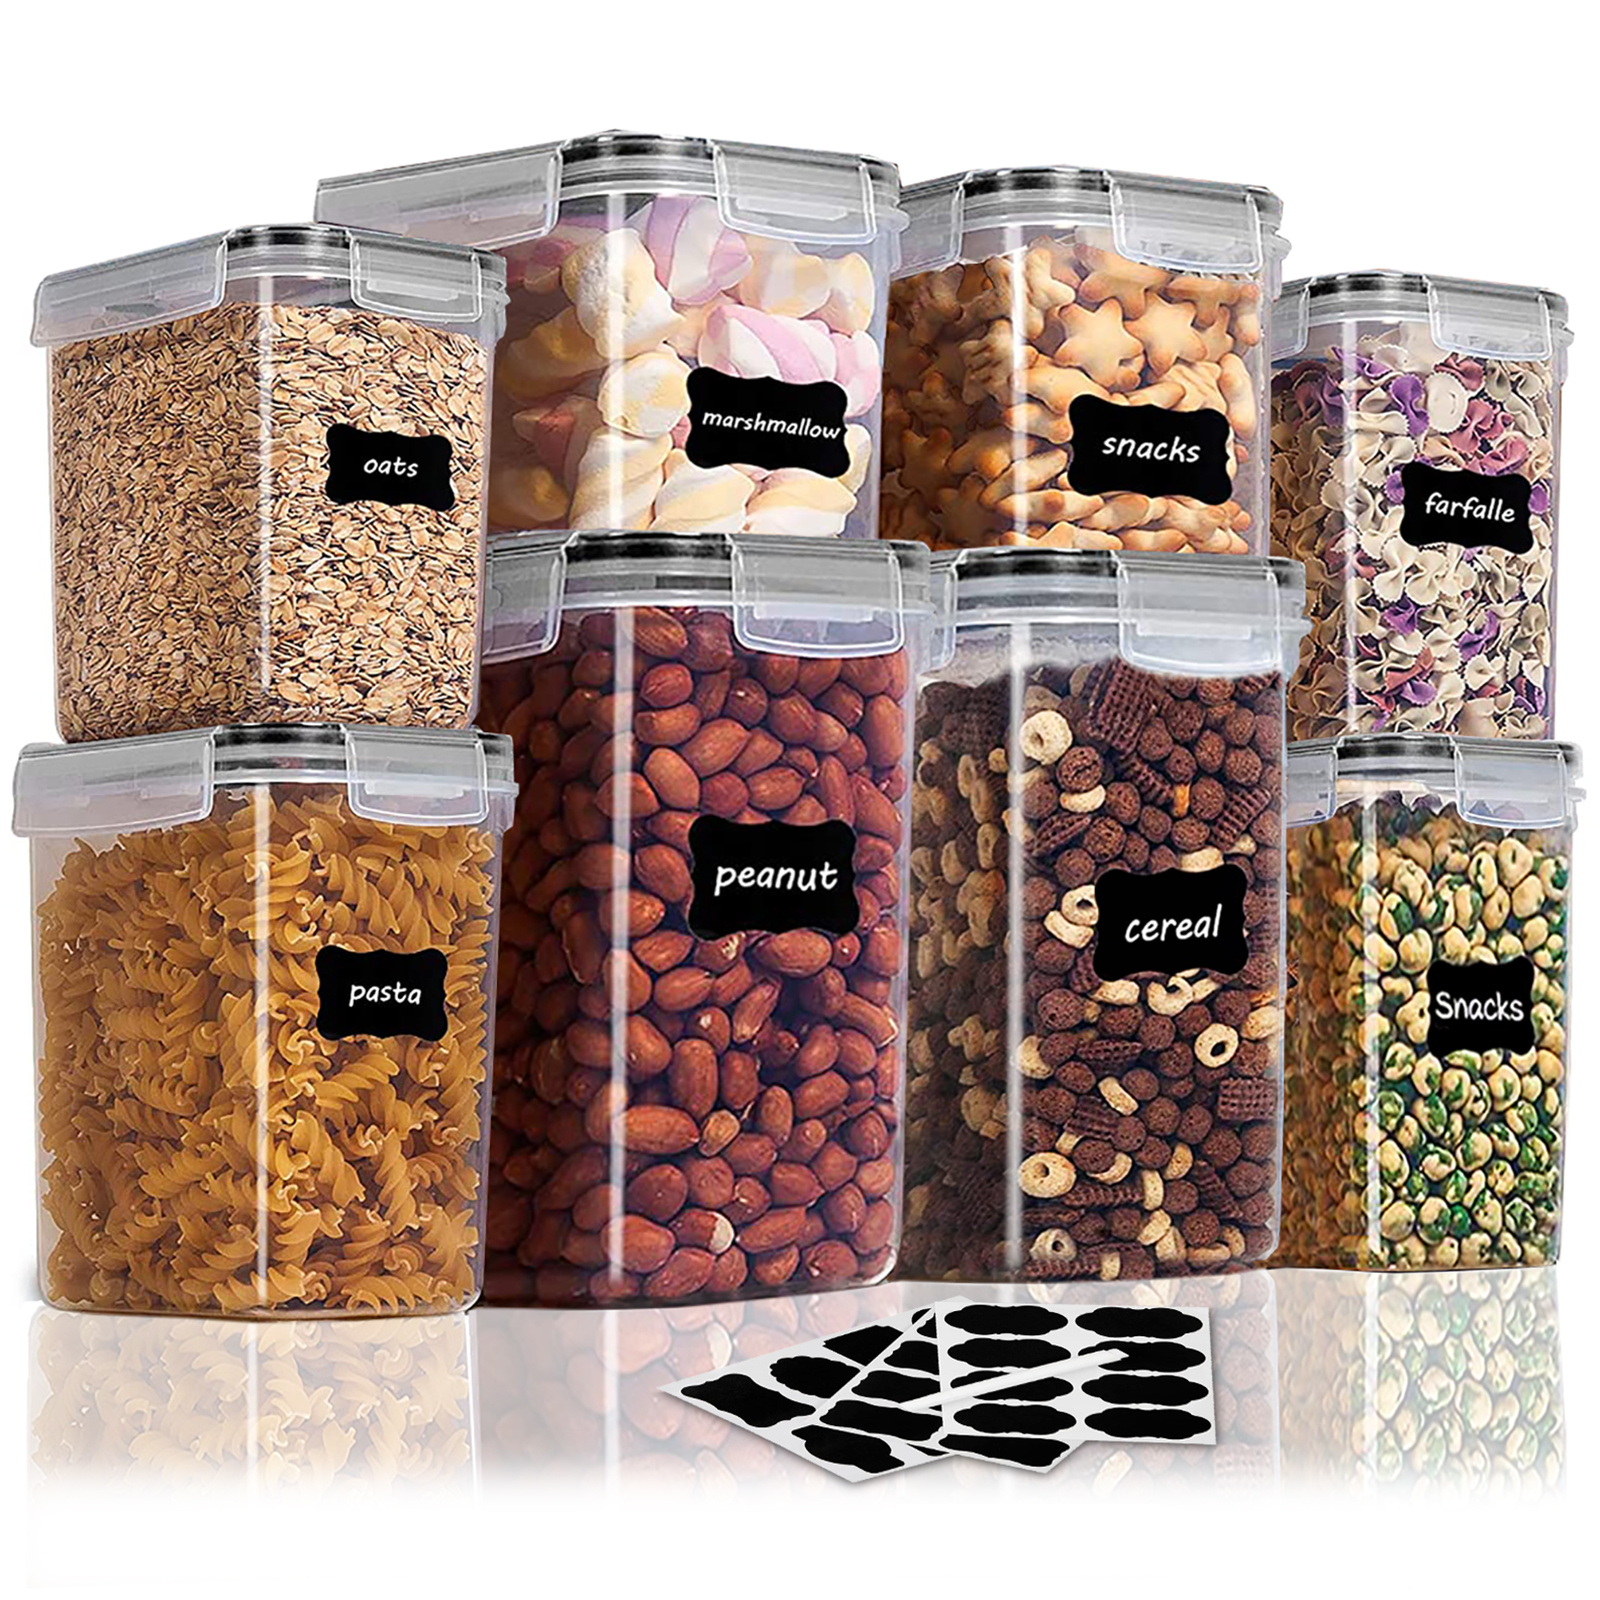 Pantry Canister Labels, Information & Specifications